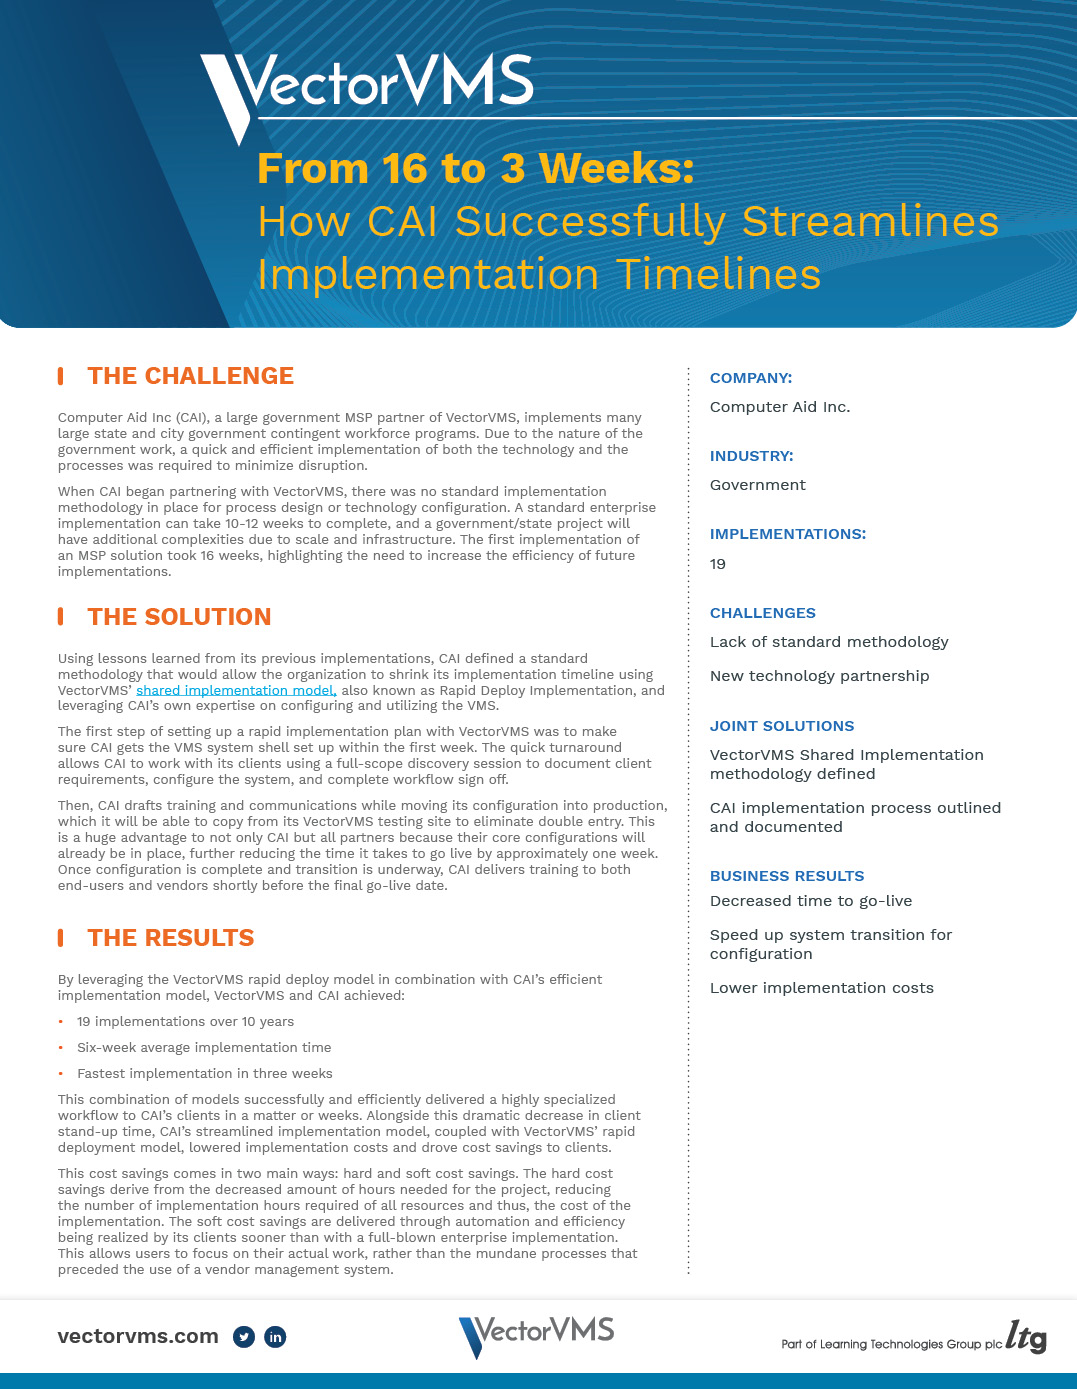 Read this case study to see how CAI has achieved implementation excellence by using VectorVMS as their technology and implementation partner.